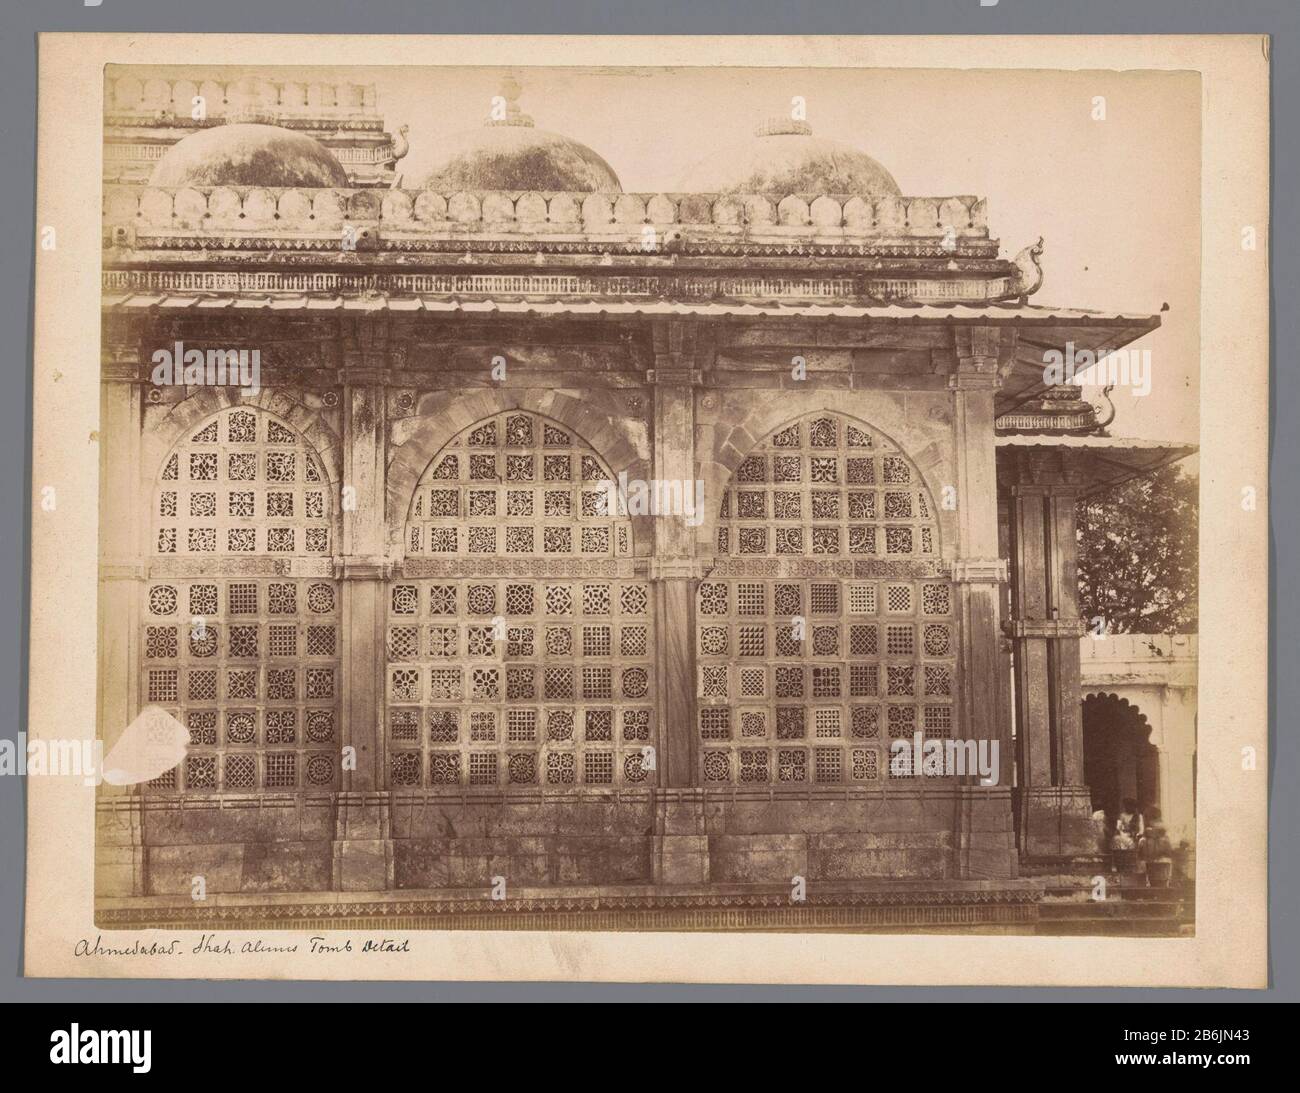 Detail of the mausoleum of E Shah Alam Ahmedabad Shah Alums Tomb Detail (title object) Detail of the mausoleum of Shah e Alam in AhmedabadAhmedabad. Shah Alums Tomb Detail (title object) Property Type: photographs Item number: RP-F F02455 Manufacturer : Photographer: anonymous place Manufacture: Unknown Date: 1850 - 1900 Physical features: albumen print material: paper cardboard Technique: albumen print dimensions: photo: H 199 mm × W 254 mmblad: h 219 mm × W 285 mm Subject: mausoleum where: Gujarat Stock Photo